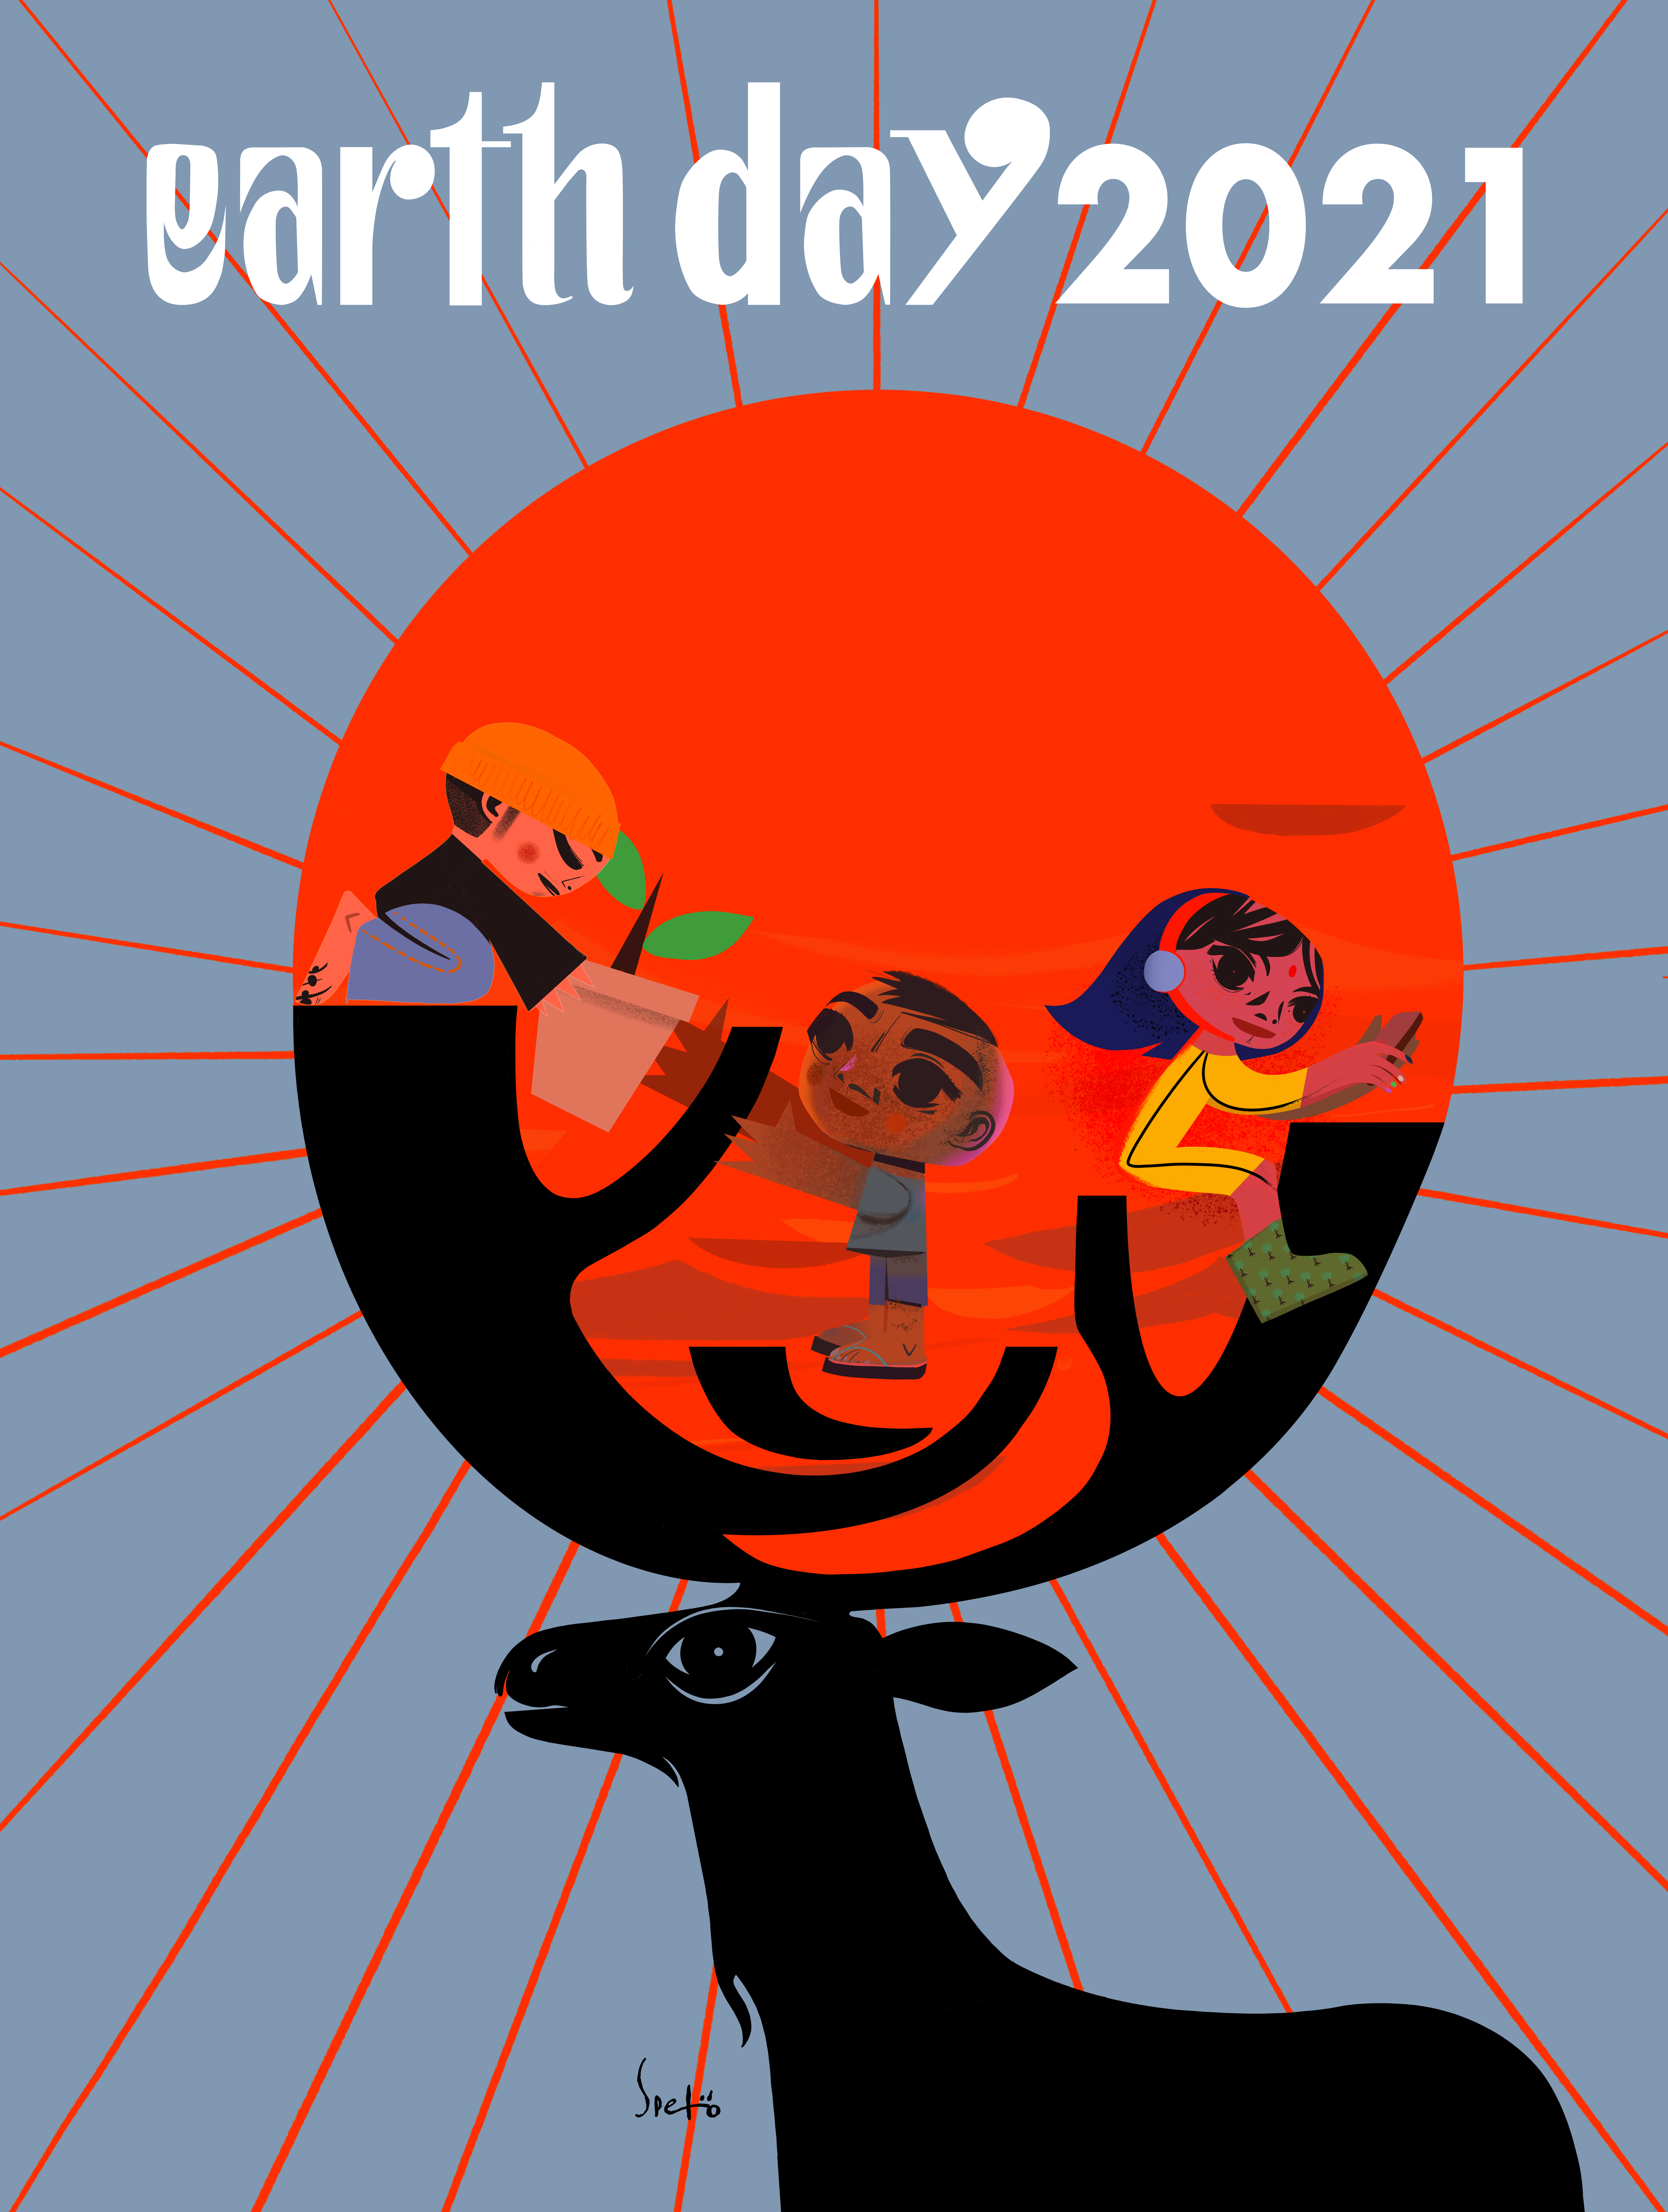 The official Earth Day 2021 poster